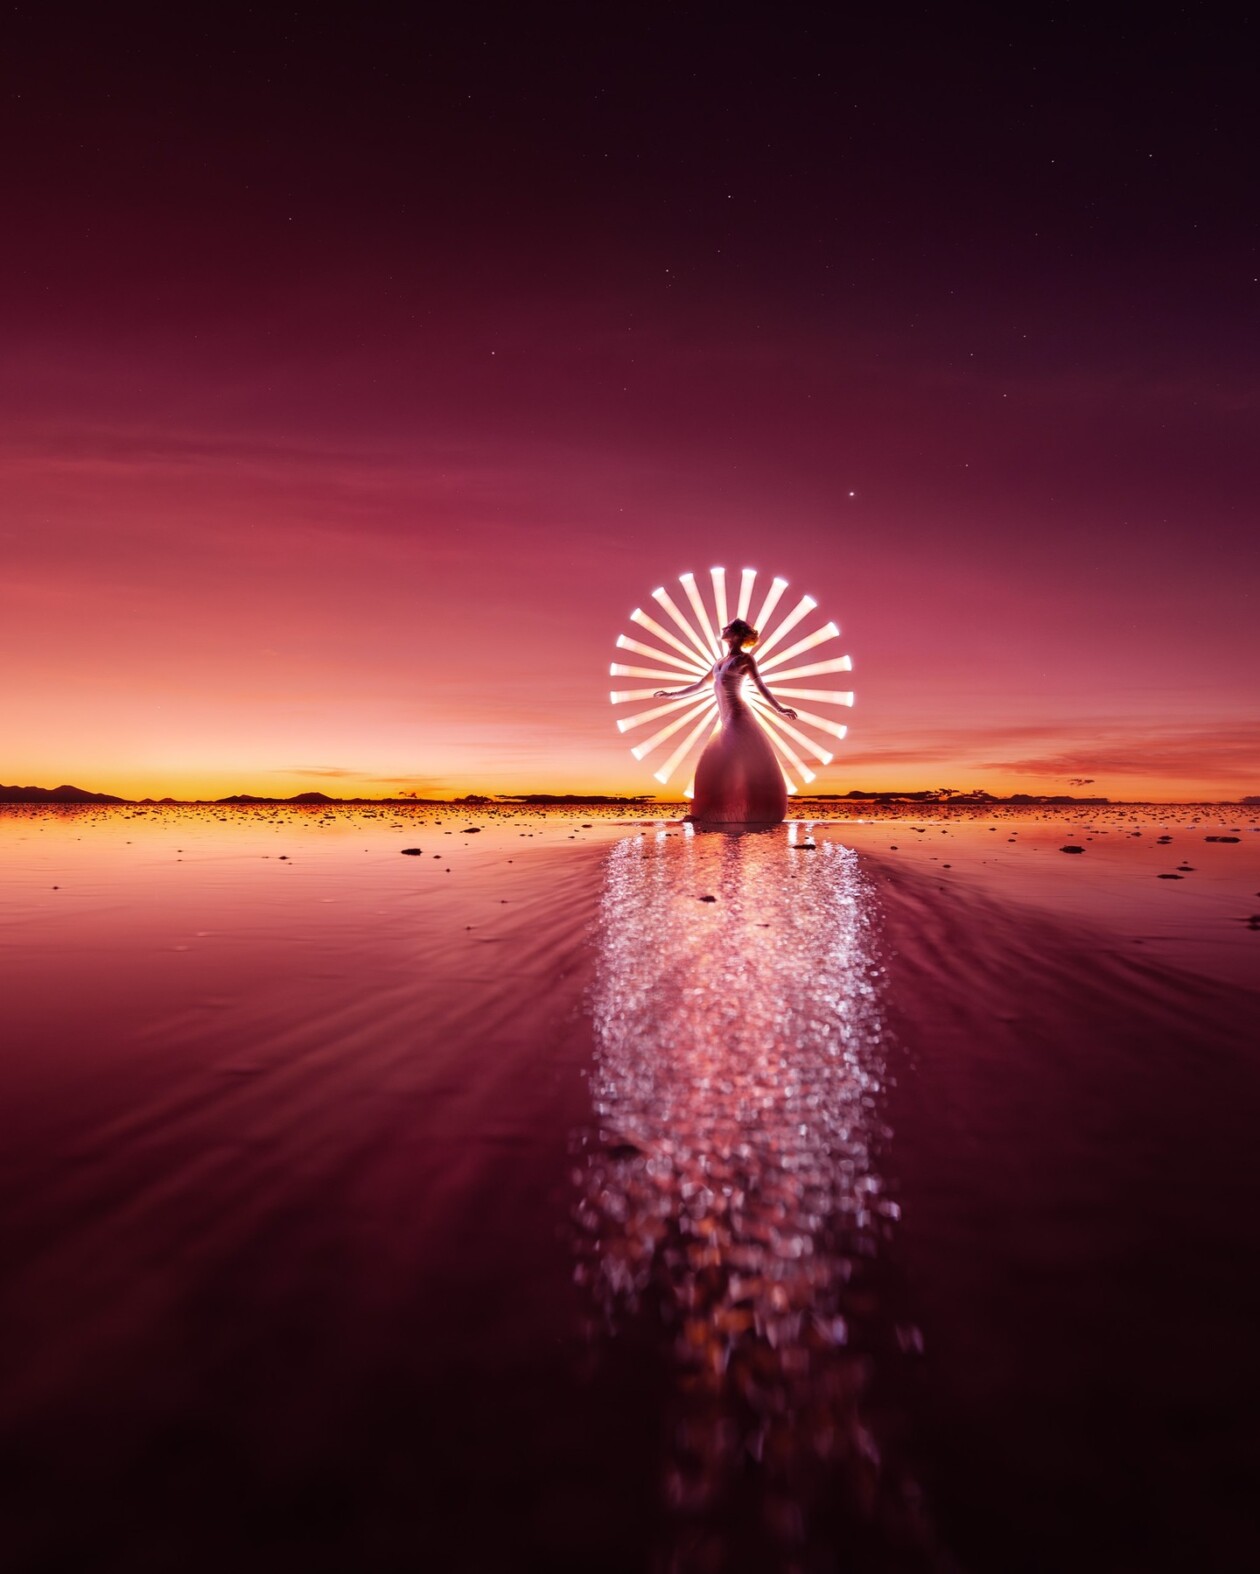 Mesmerizing Light Paintings Set Against A Fiery Red Sky At Bolivias Uyuni Salt Flat By Eric Pare And Kim Henry 5